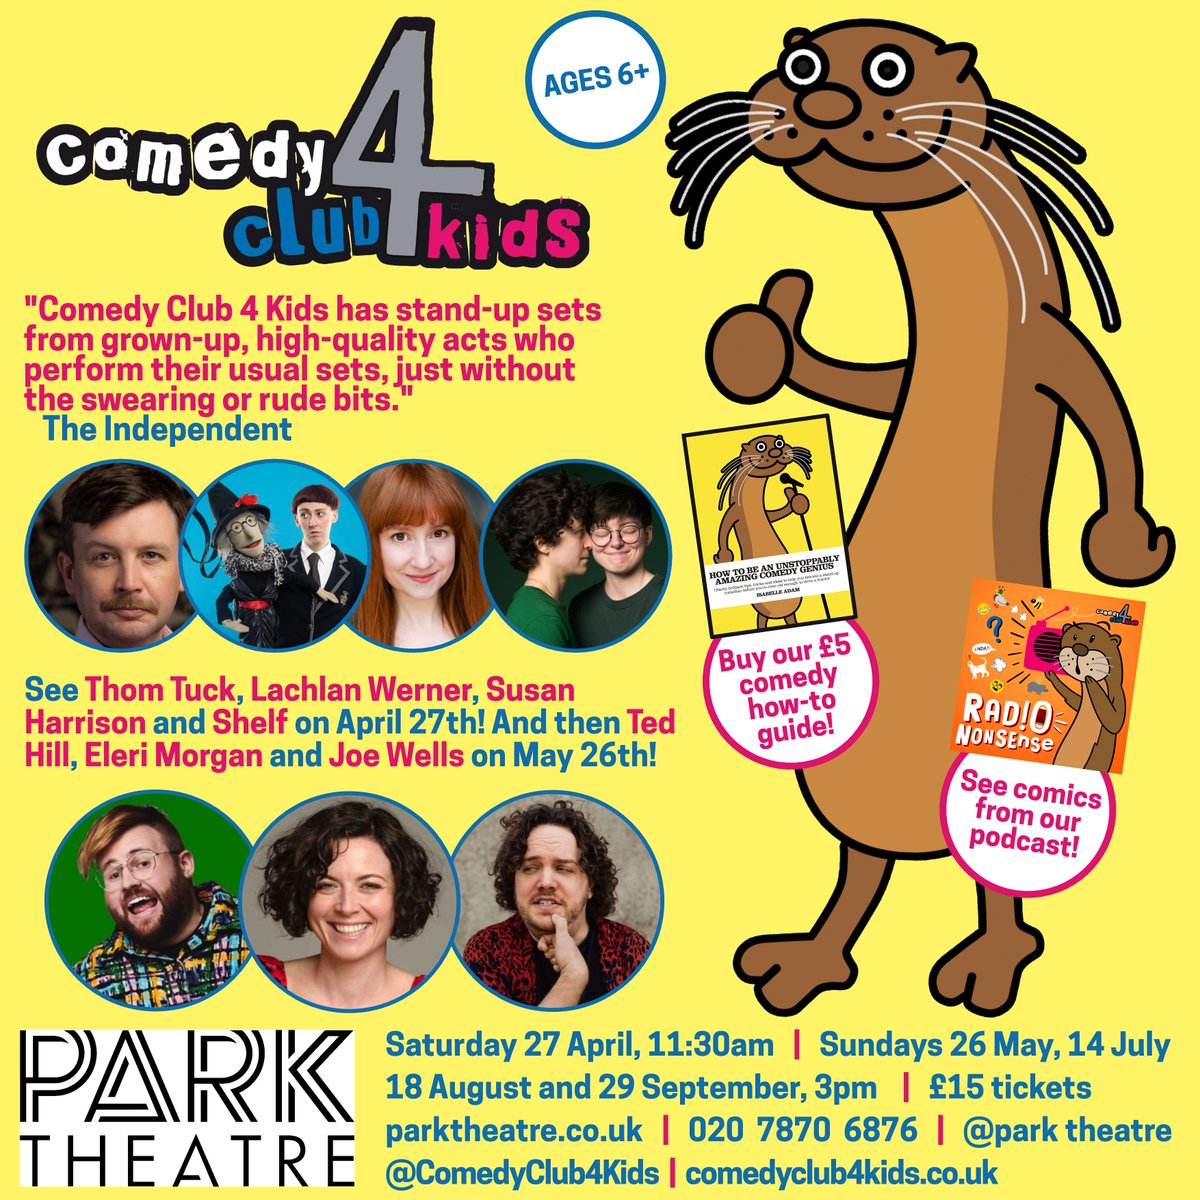 London! KIDS! We're back at Finsbury Park's @ParkTheatre on Saturday 27th April, with @turlygod MCing @LachyWerner, @SueHarrison123 and sketch duo @shelfcomedy! And then @thetedhill, @Eleri_Morgan and @joewellscomic on May 26th! More dates onsale soon! 🎟️parktheatre.co.uk/whats-on/comed…